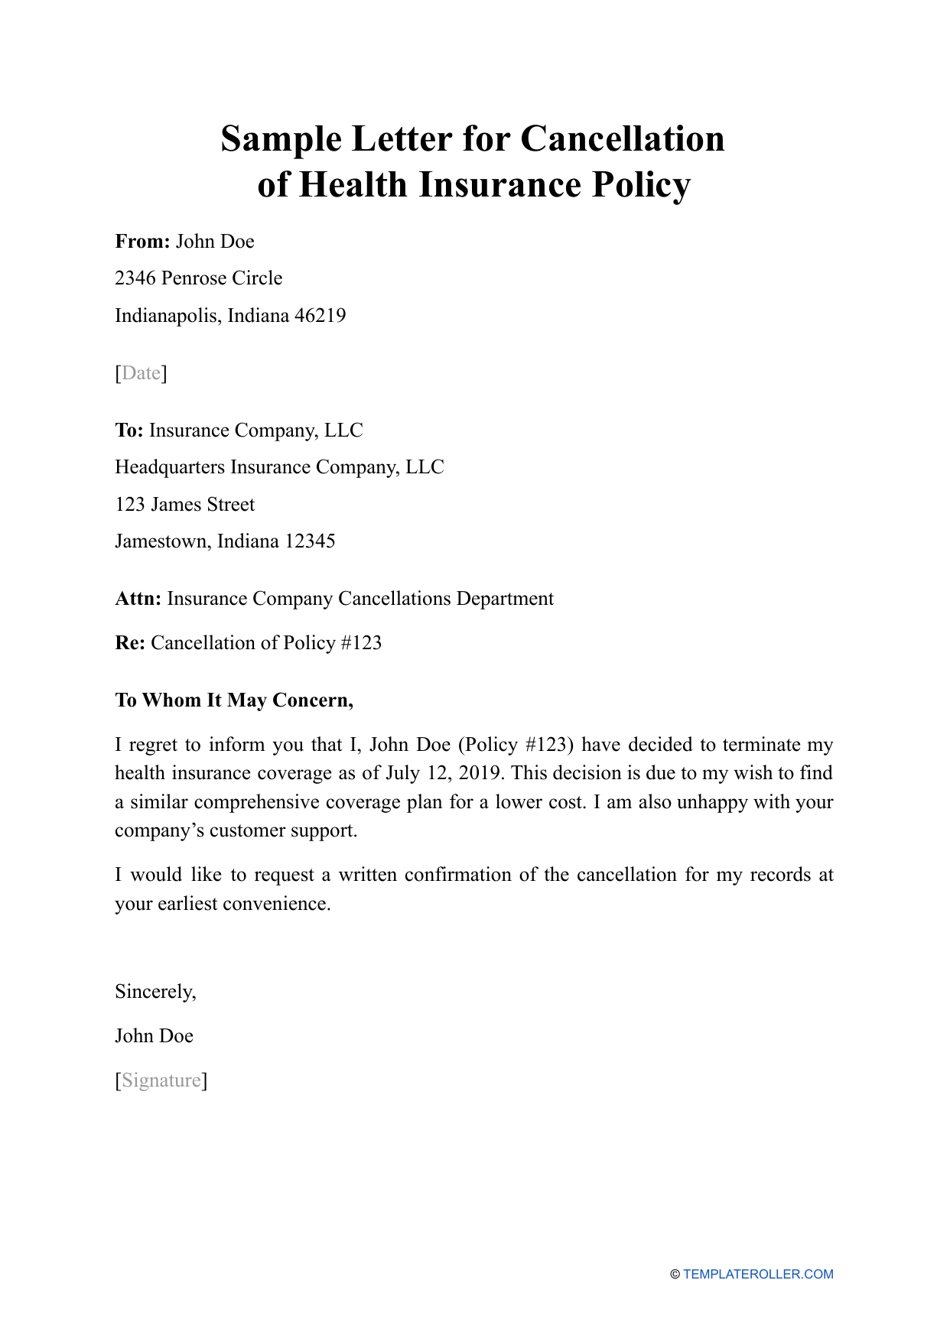 Sample Letter For Cancellation Of Health Insurance Policy Download Printable Pdf Templateroller